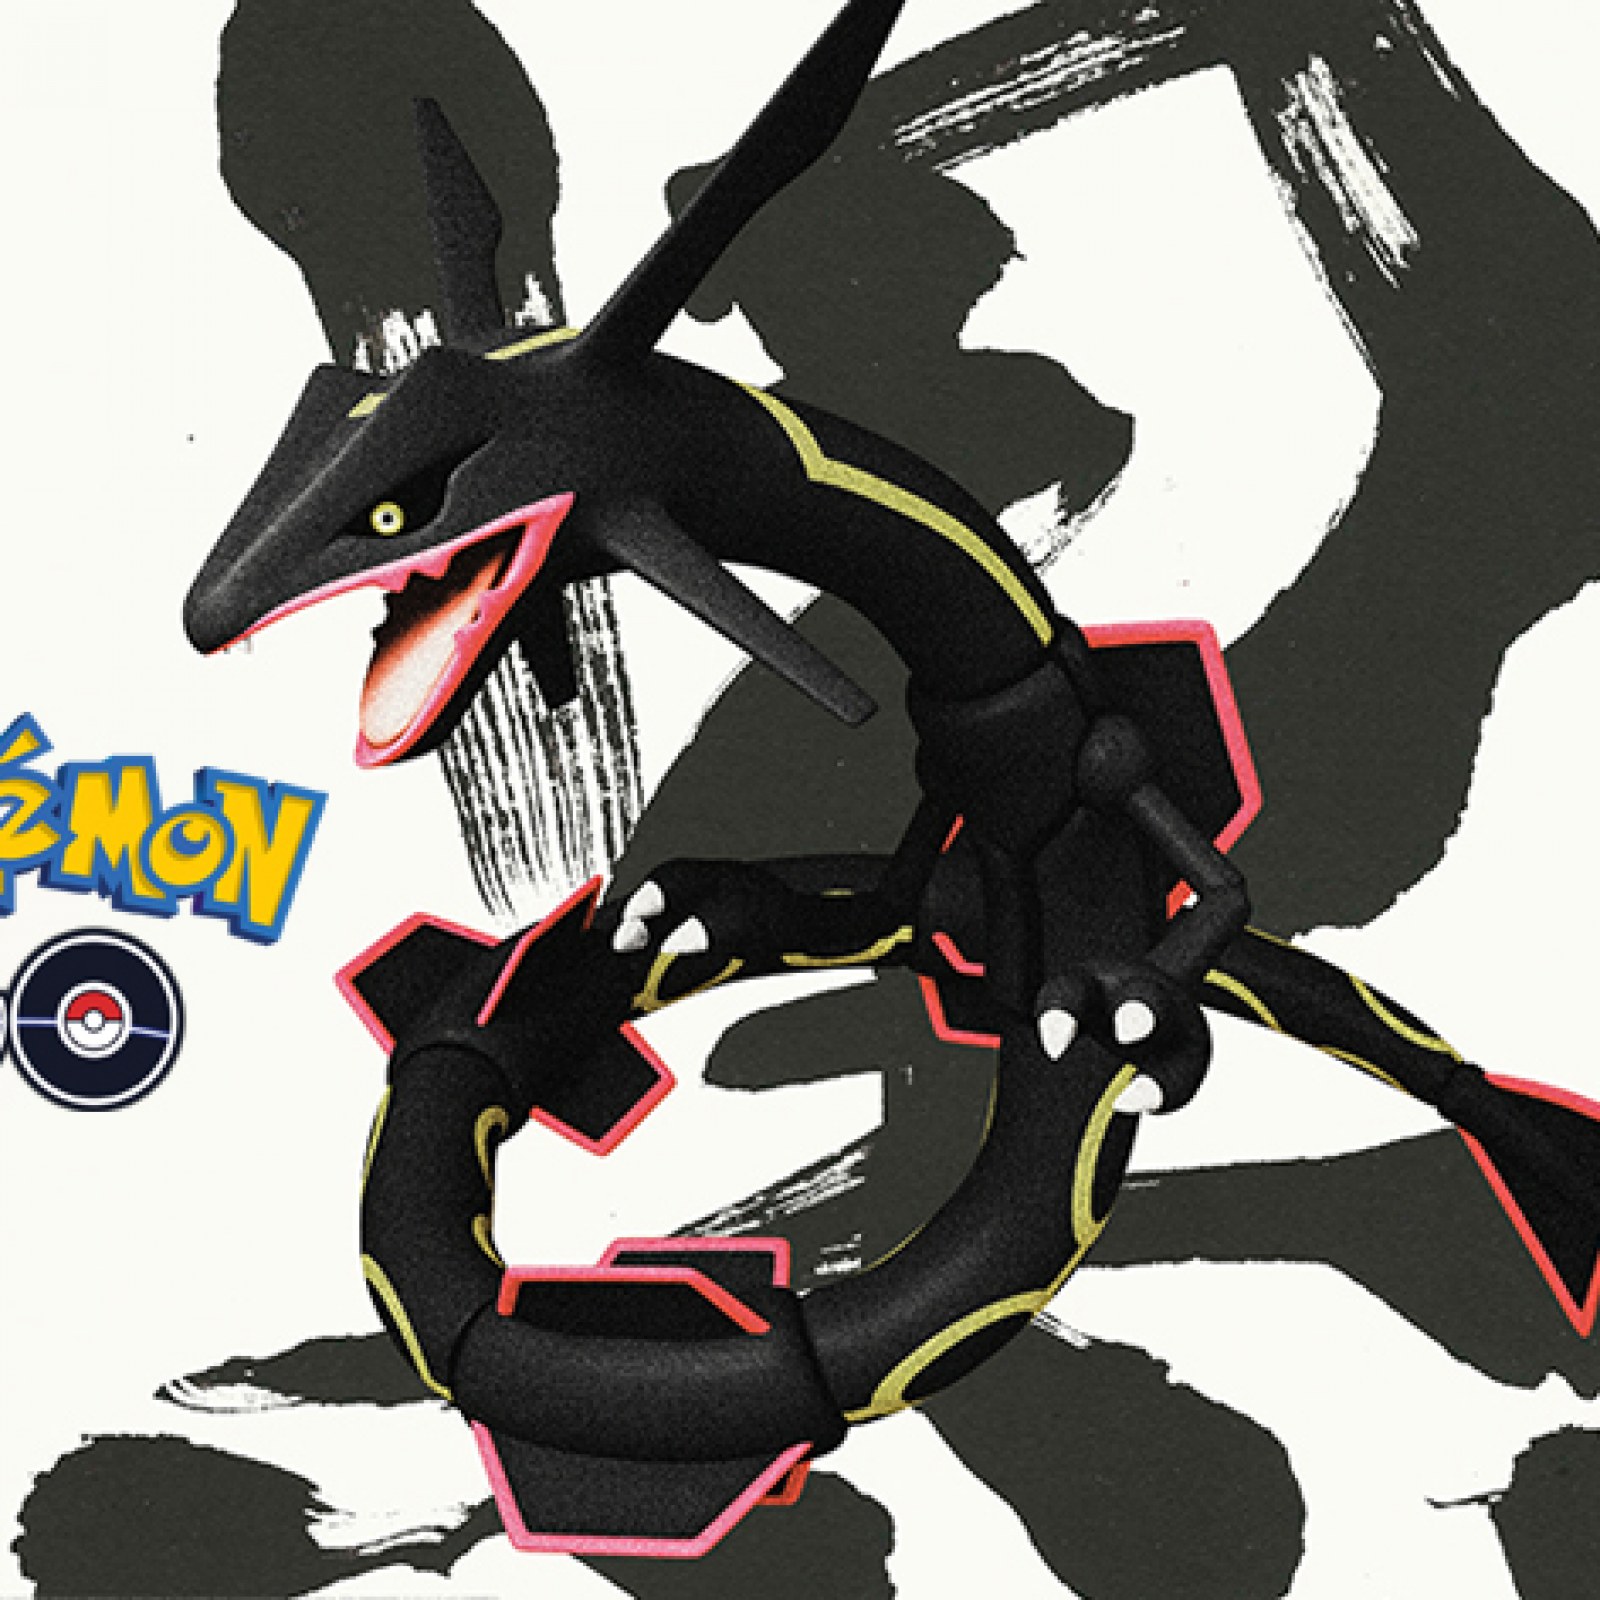 Receive a Shiny Rayquaza in Pokemon ORAS - Gaming Respawn